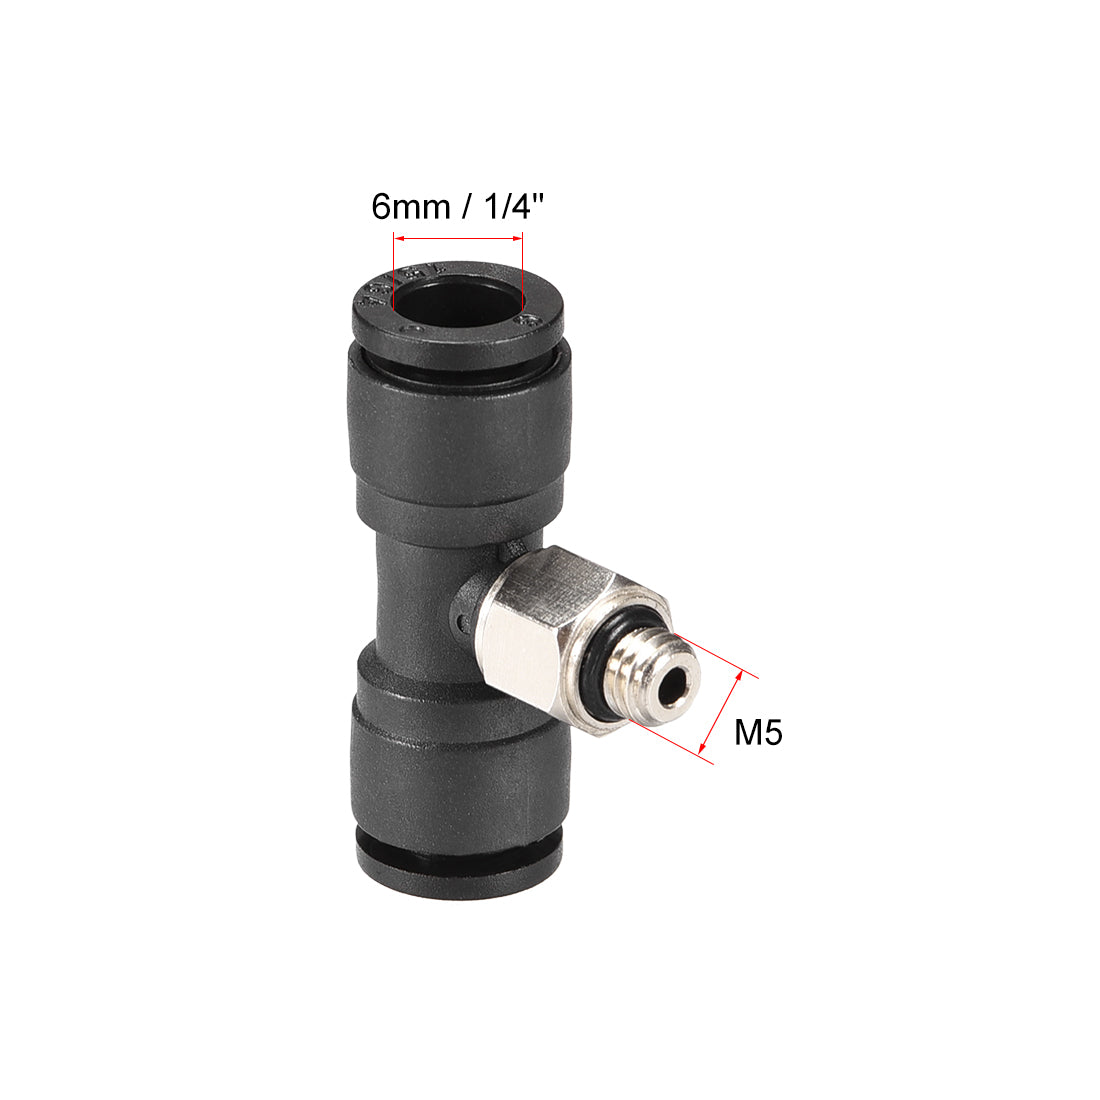 uxcell Uxcell Plastic Tee Push To Connect Tube Fittings 6mm x M5 Male Thread Push Lock 2pcs